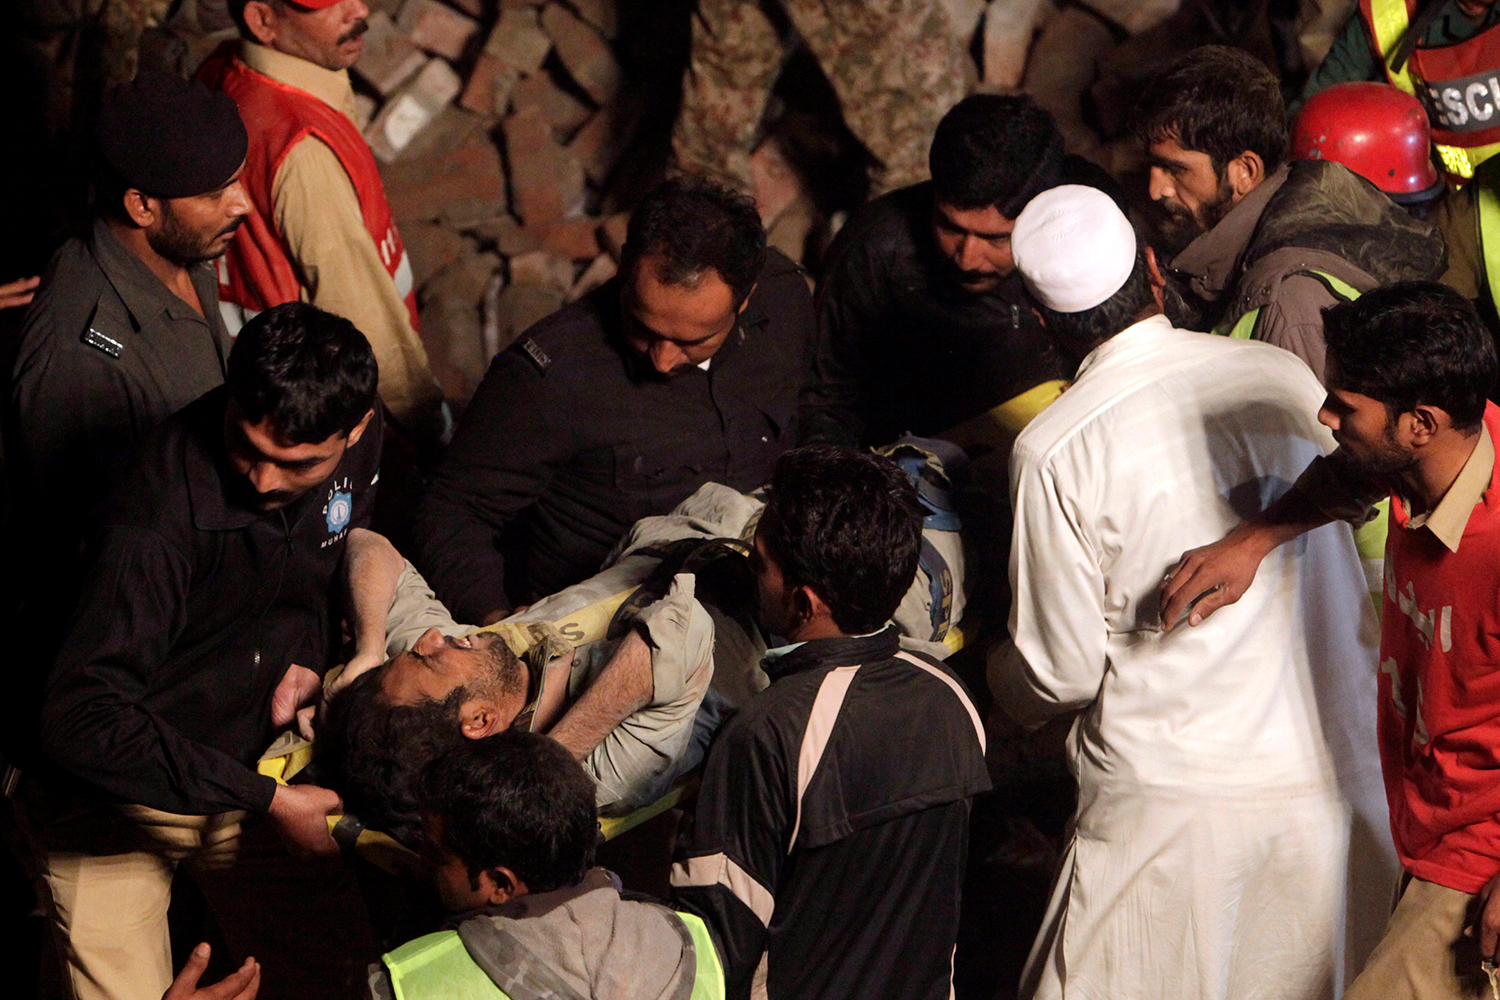 18 dead and over 100 missing in Pakistan factory collapse